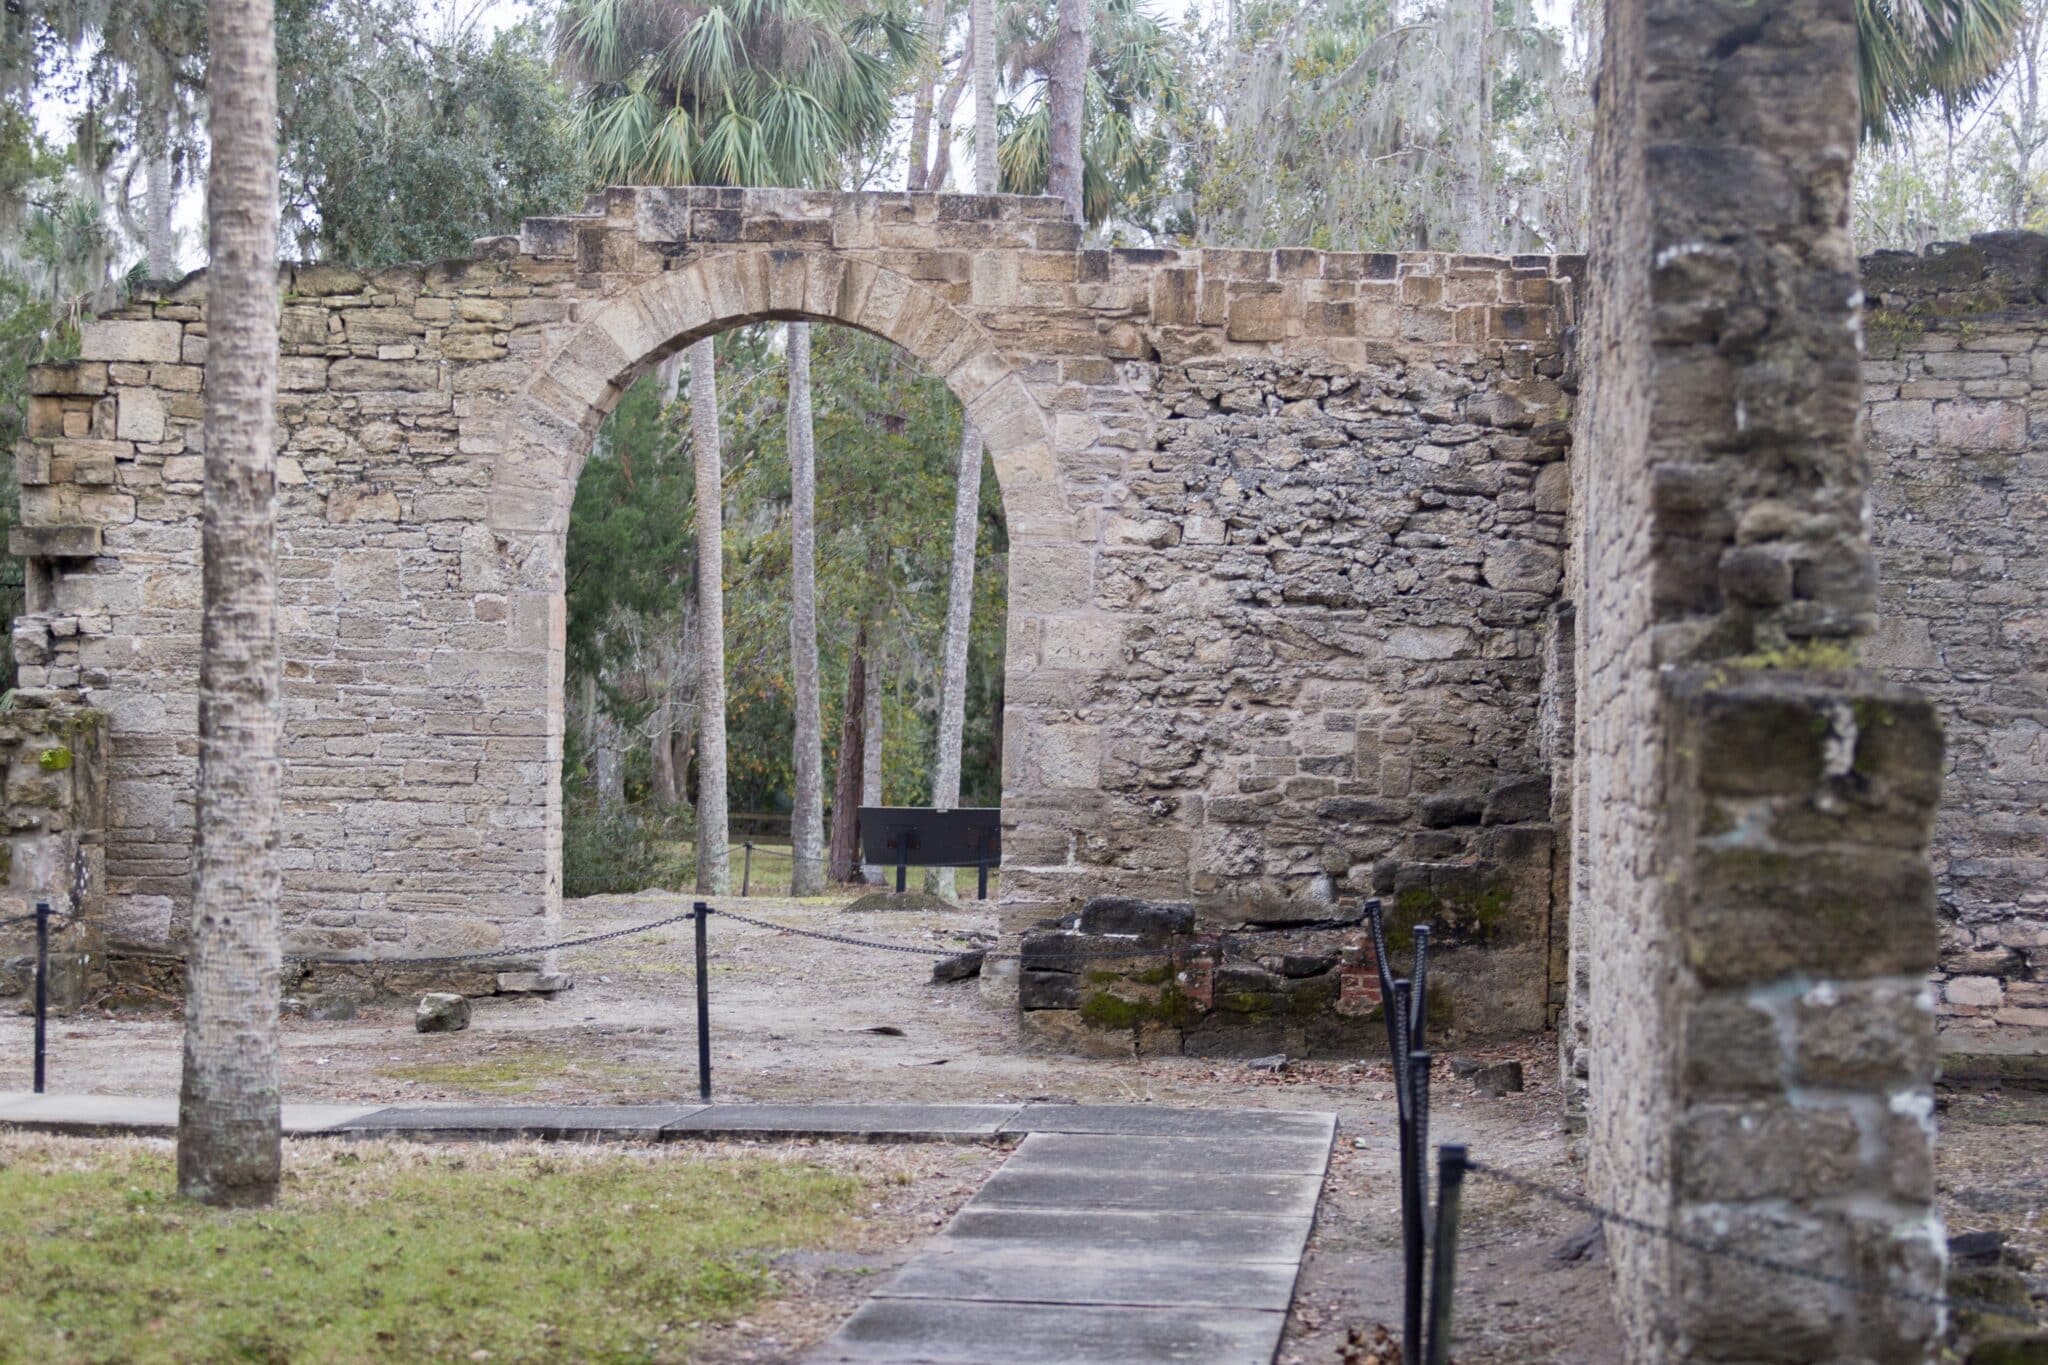 Sugar Mill ruins in New Smyrna Beach by Hinson Photography